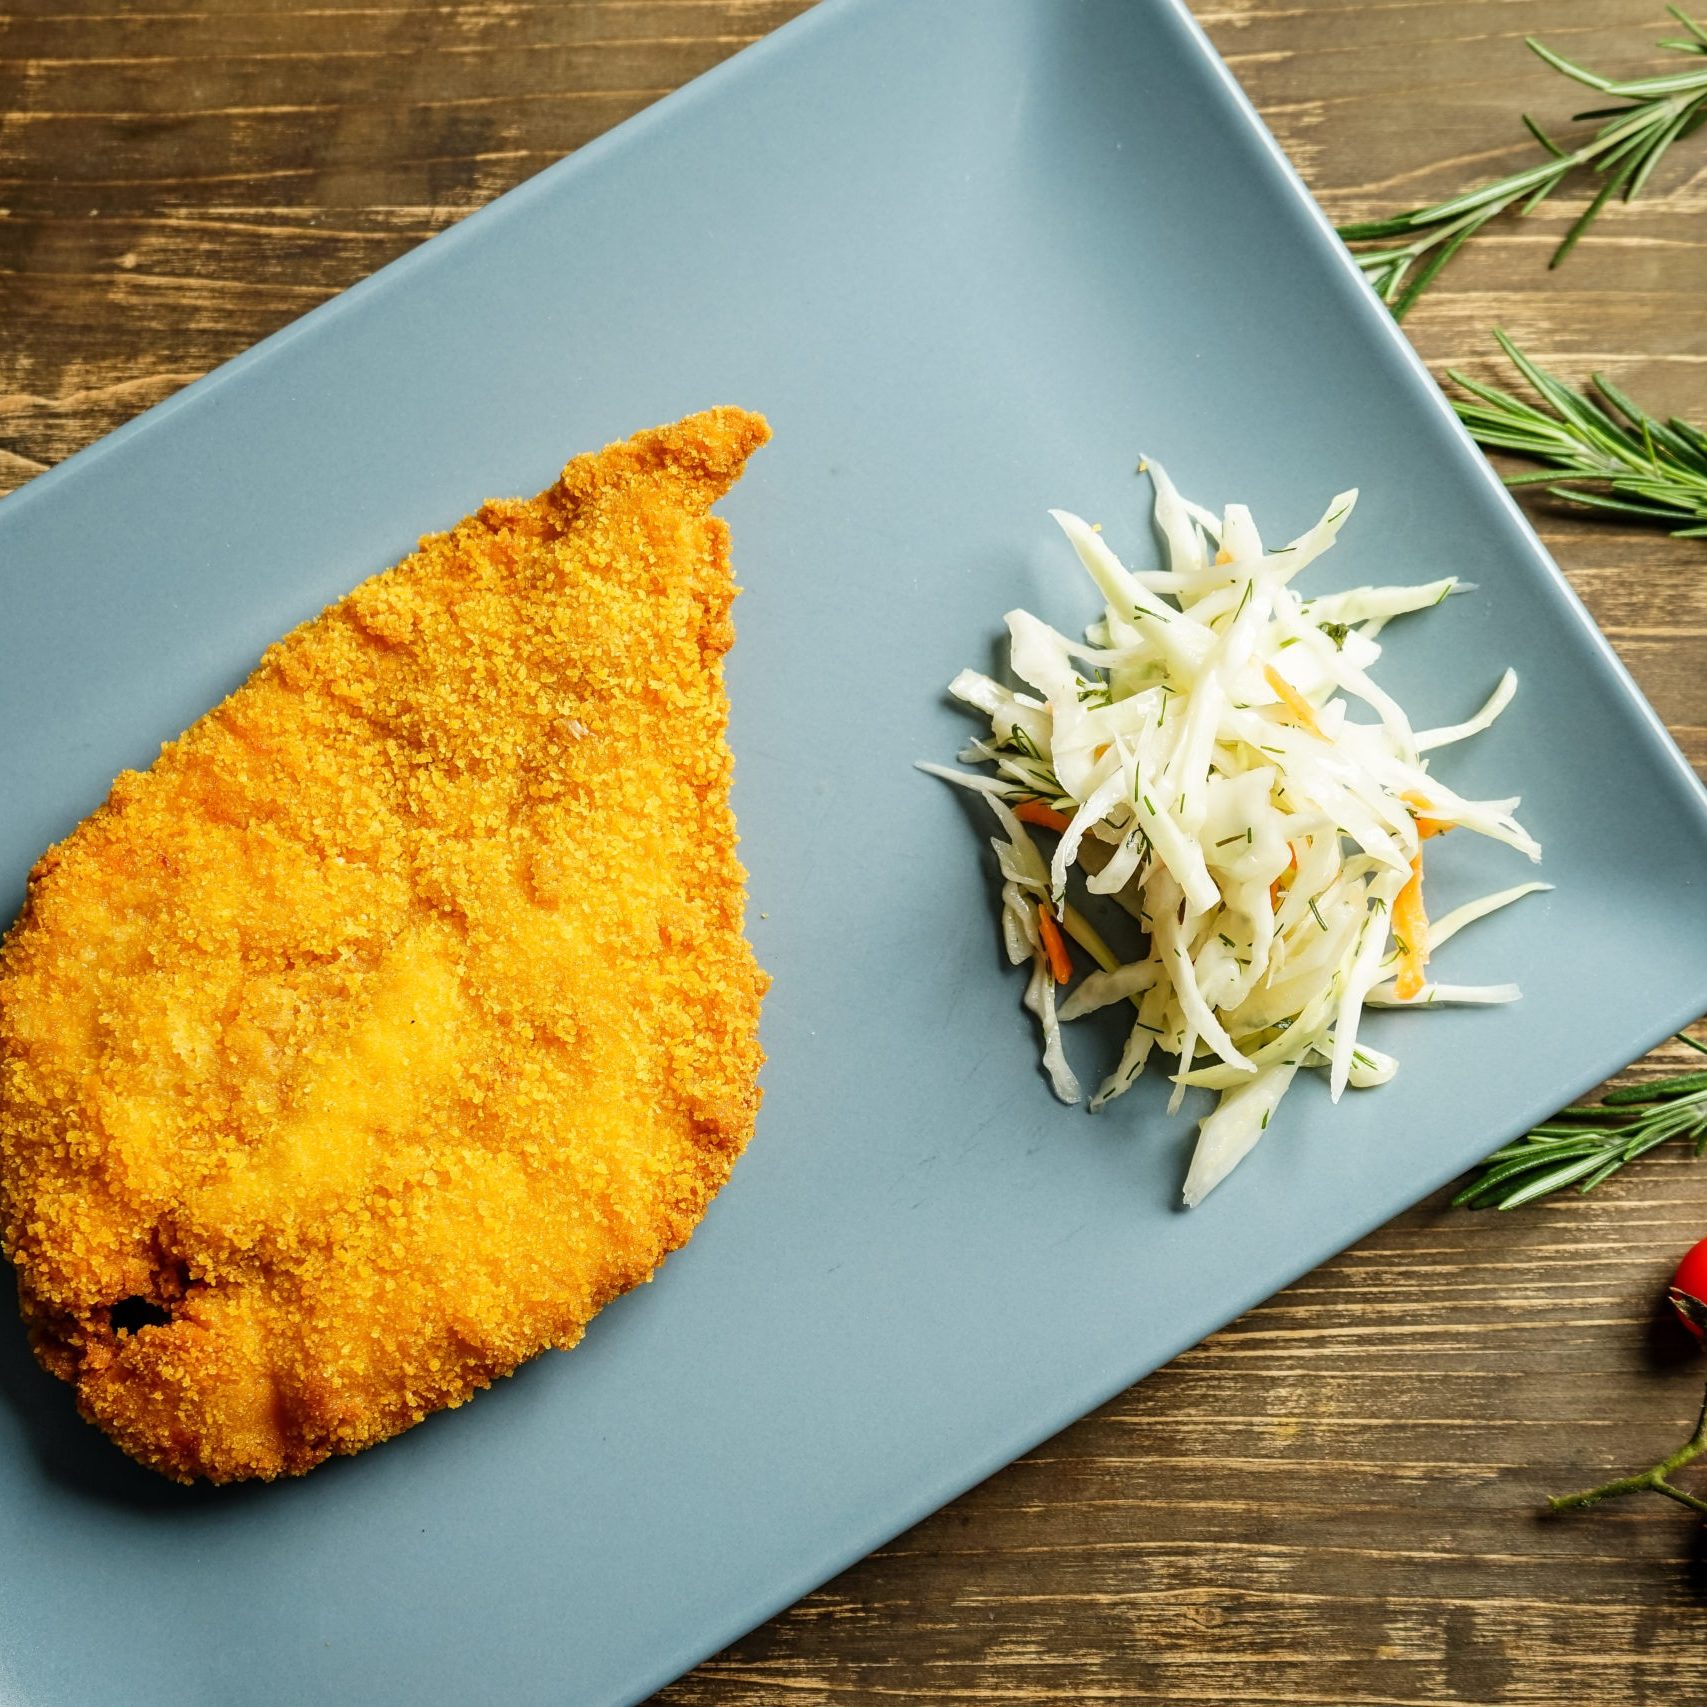 Schnitzel served on blue plate. Top view